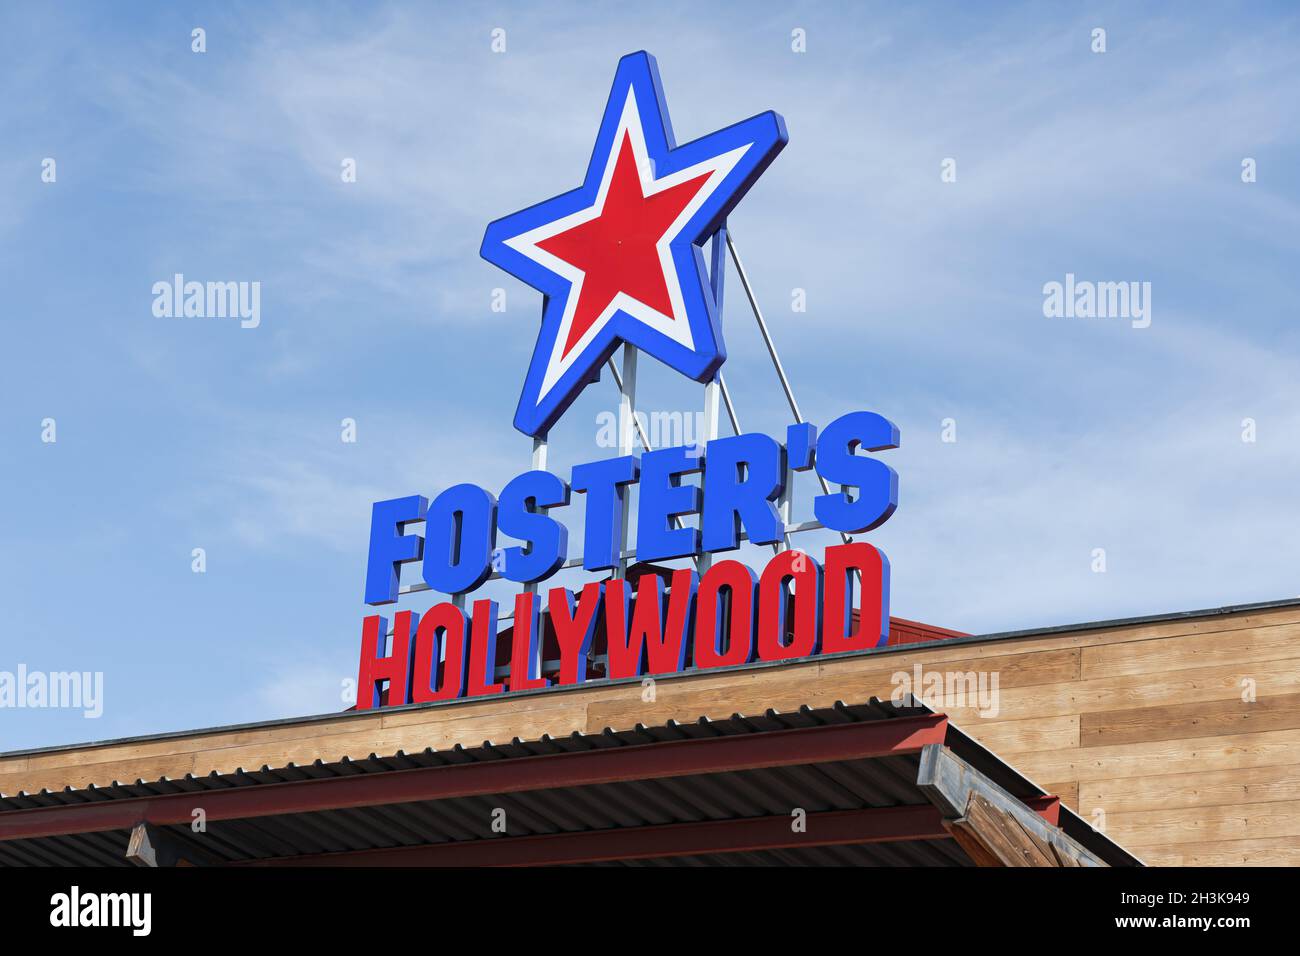 LA ELIANA, SPAIN - OCTOBER 27, 2021: Foster's Hollywood is a chain of american fast food restaurants Stock Photo